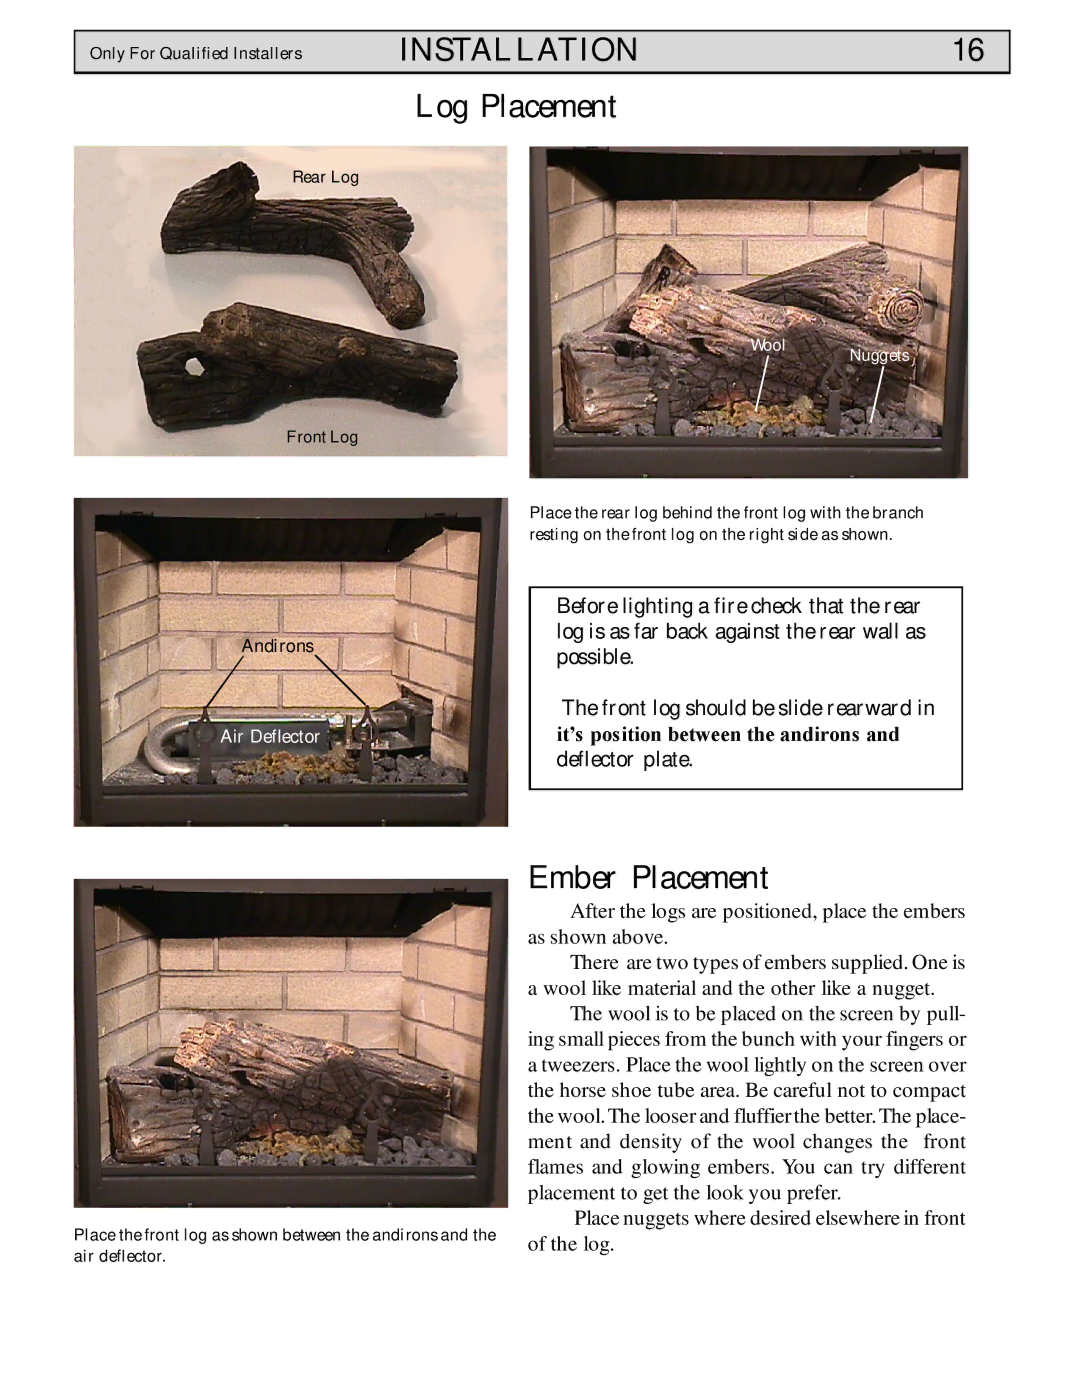 Harman Stove Company Conquest Gas Stove manual INSTALLATION16, Log Placement, Ember Placement, Deflector plate 